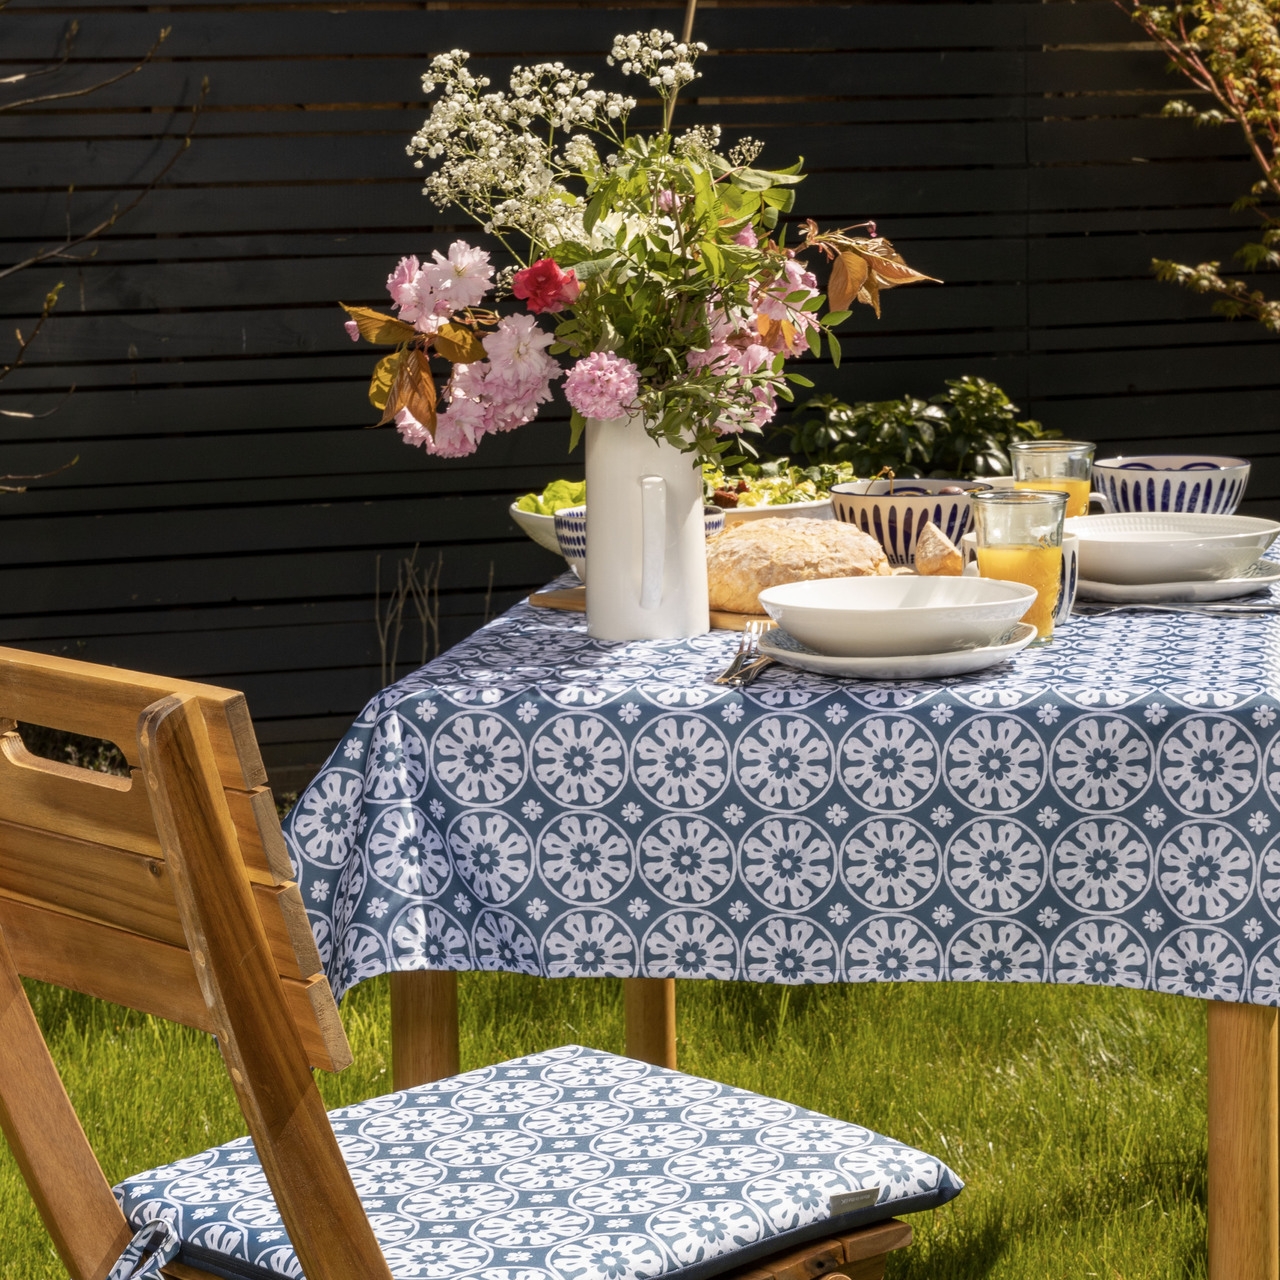 Celina Digby Luxury Outdoor Garden Tablecloth AVAILABLE IN 5 SIZES – Optional Centre Hole for Parasol Casablanca Navy LARGE (220cm x 140cm)